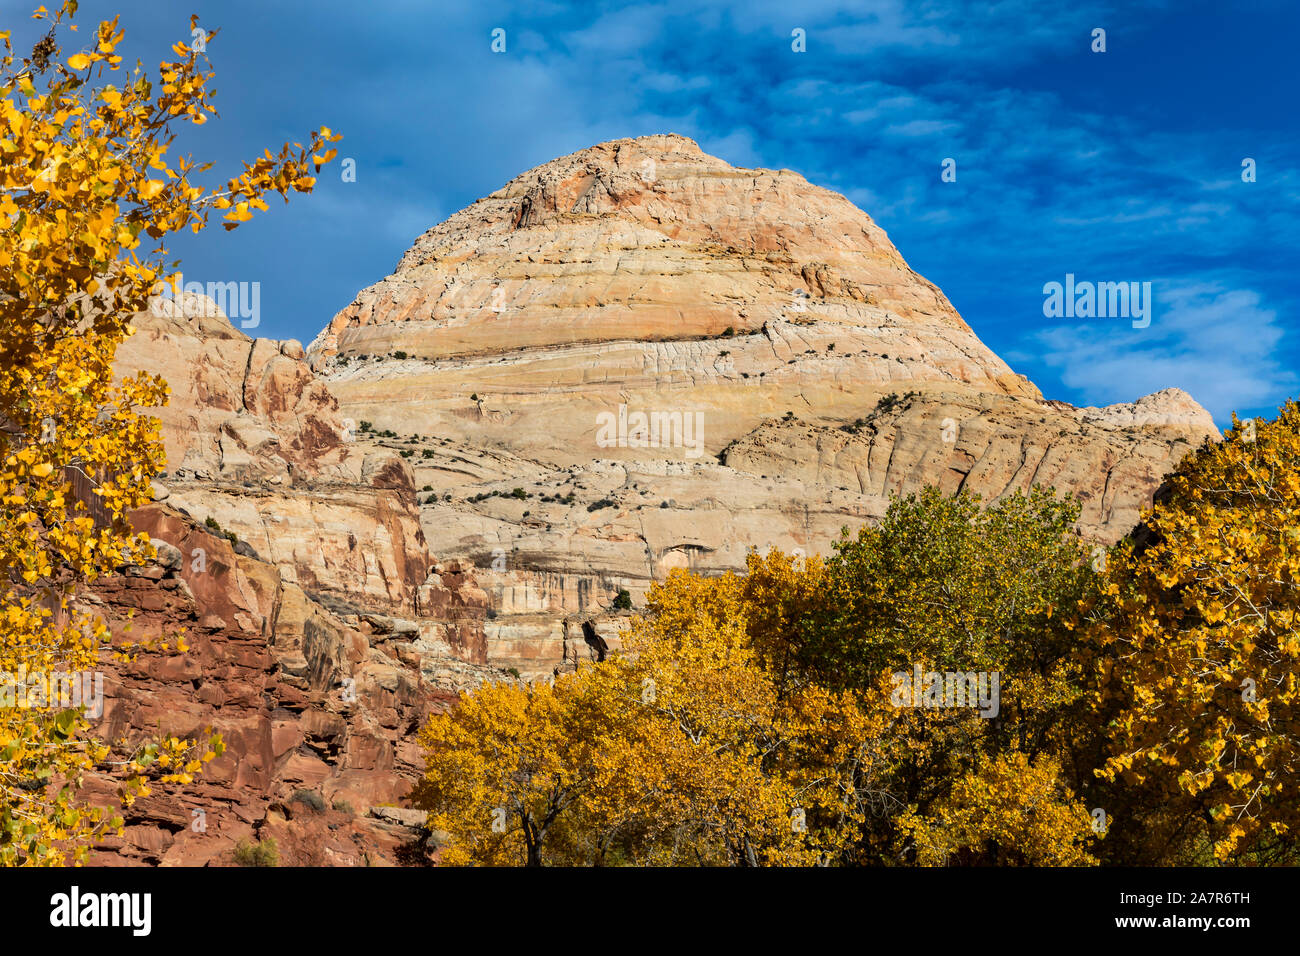 The fall colors on the trees frame the formation known as Capitol Dome, the namesake of Capitol Reef National Park, Utah, USA.  Early settlers of the Stock Photo